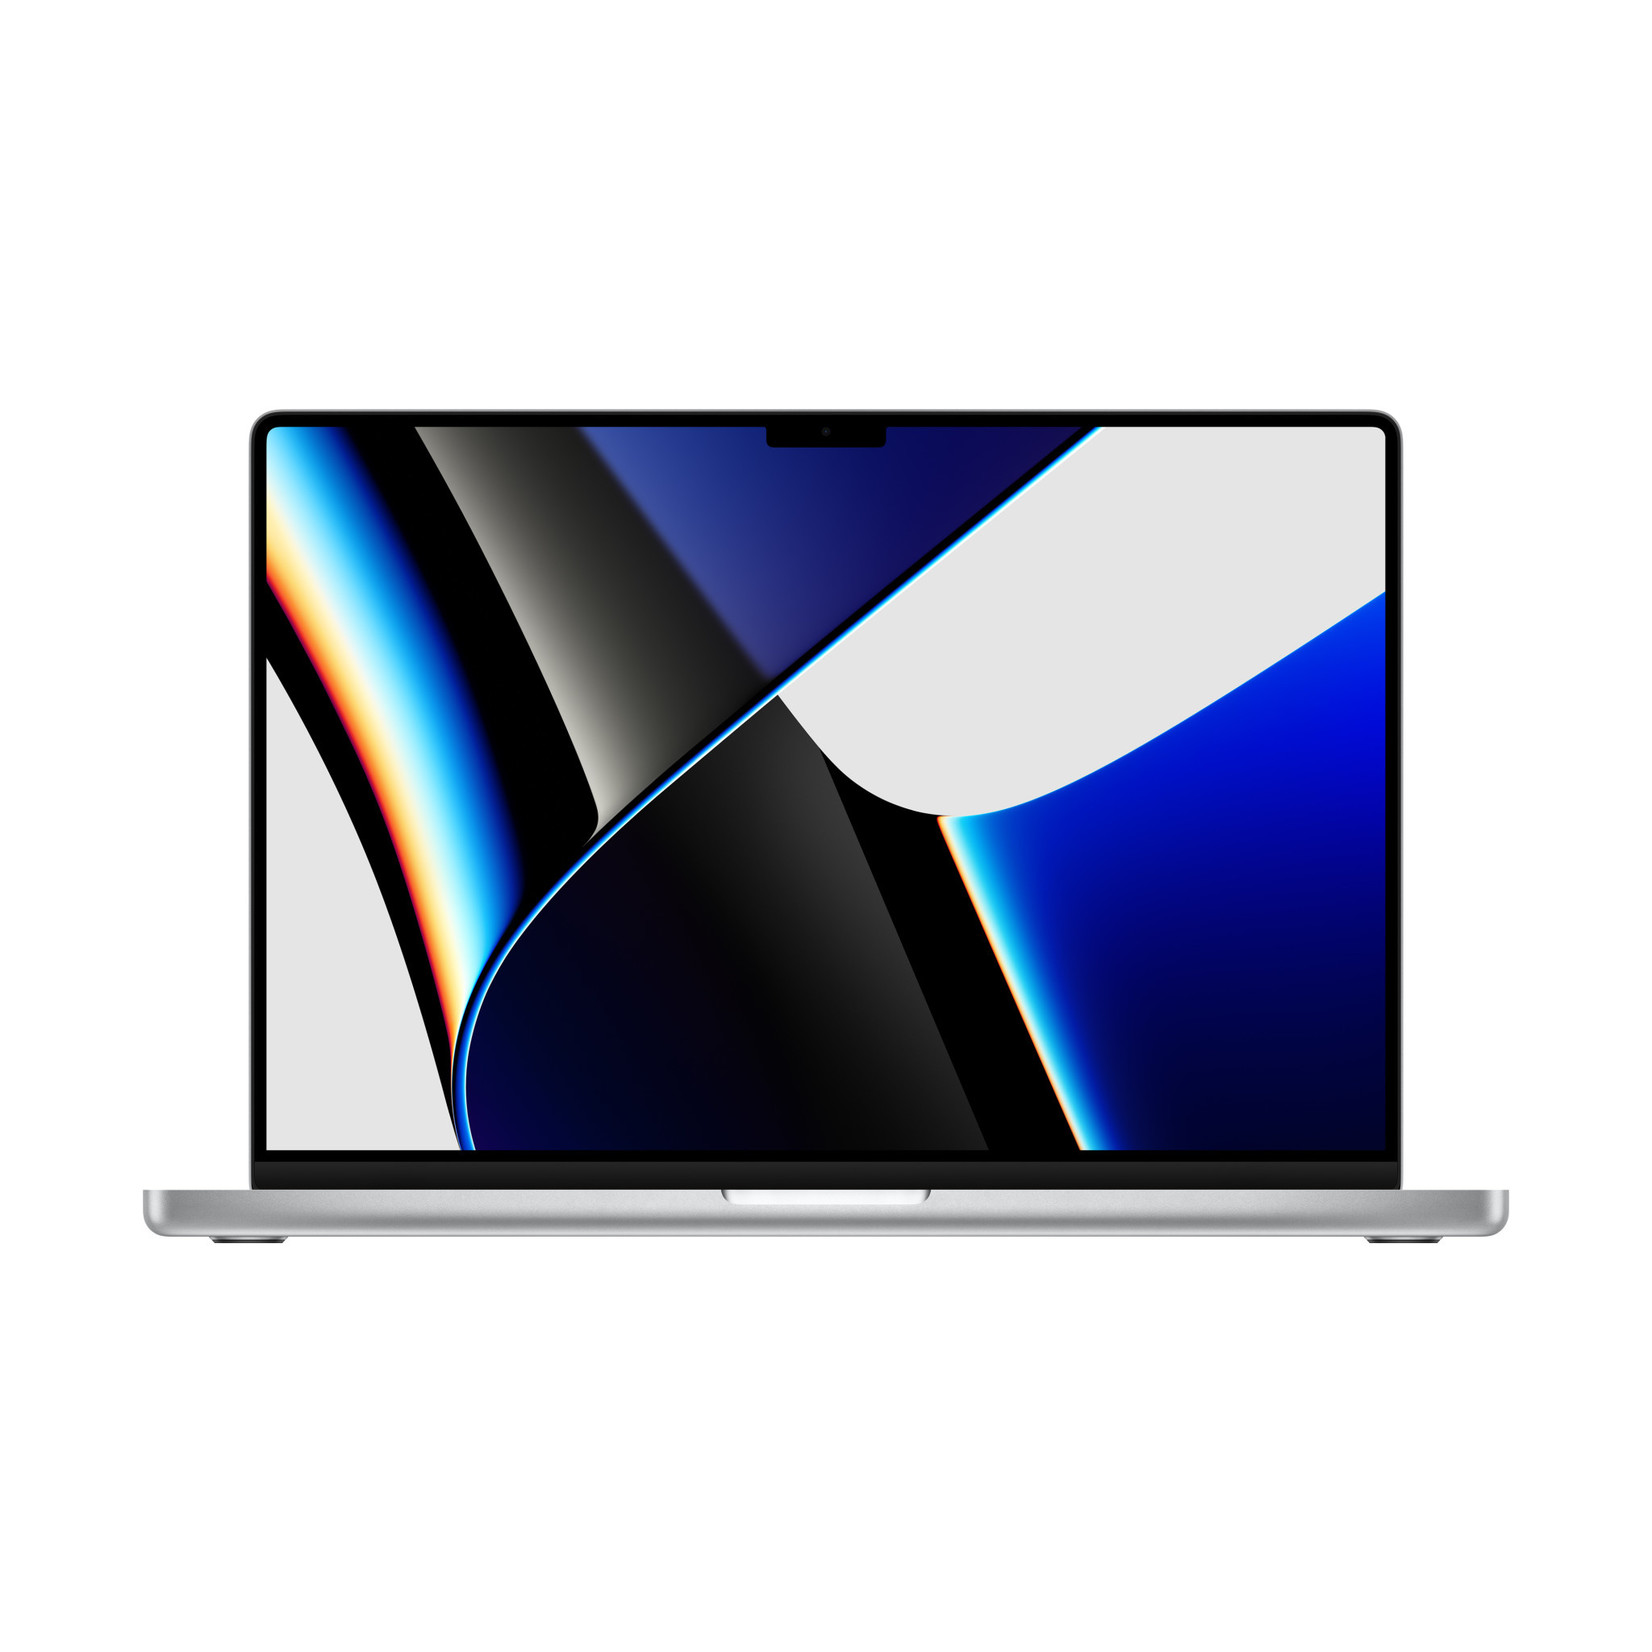 Apple 16-inch MacBook Pro: M1 Pro chip, 16GB Memory REDUCED BY $500 MORE!